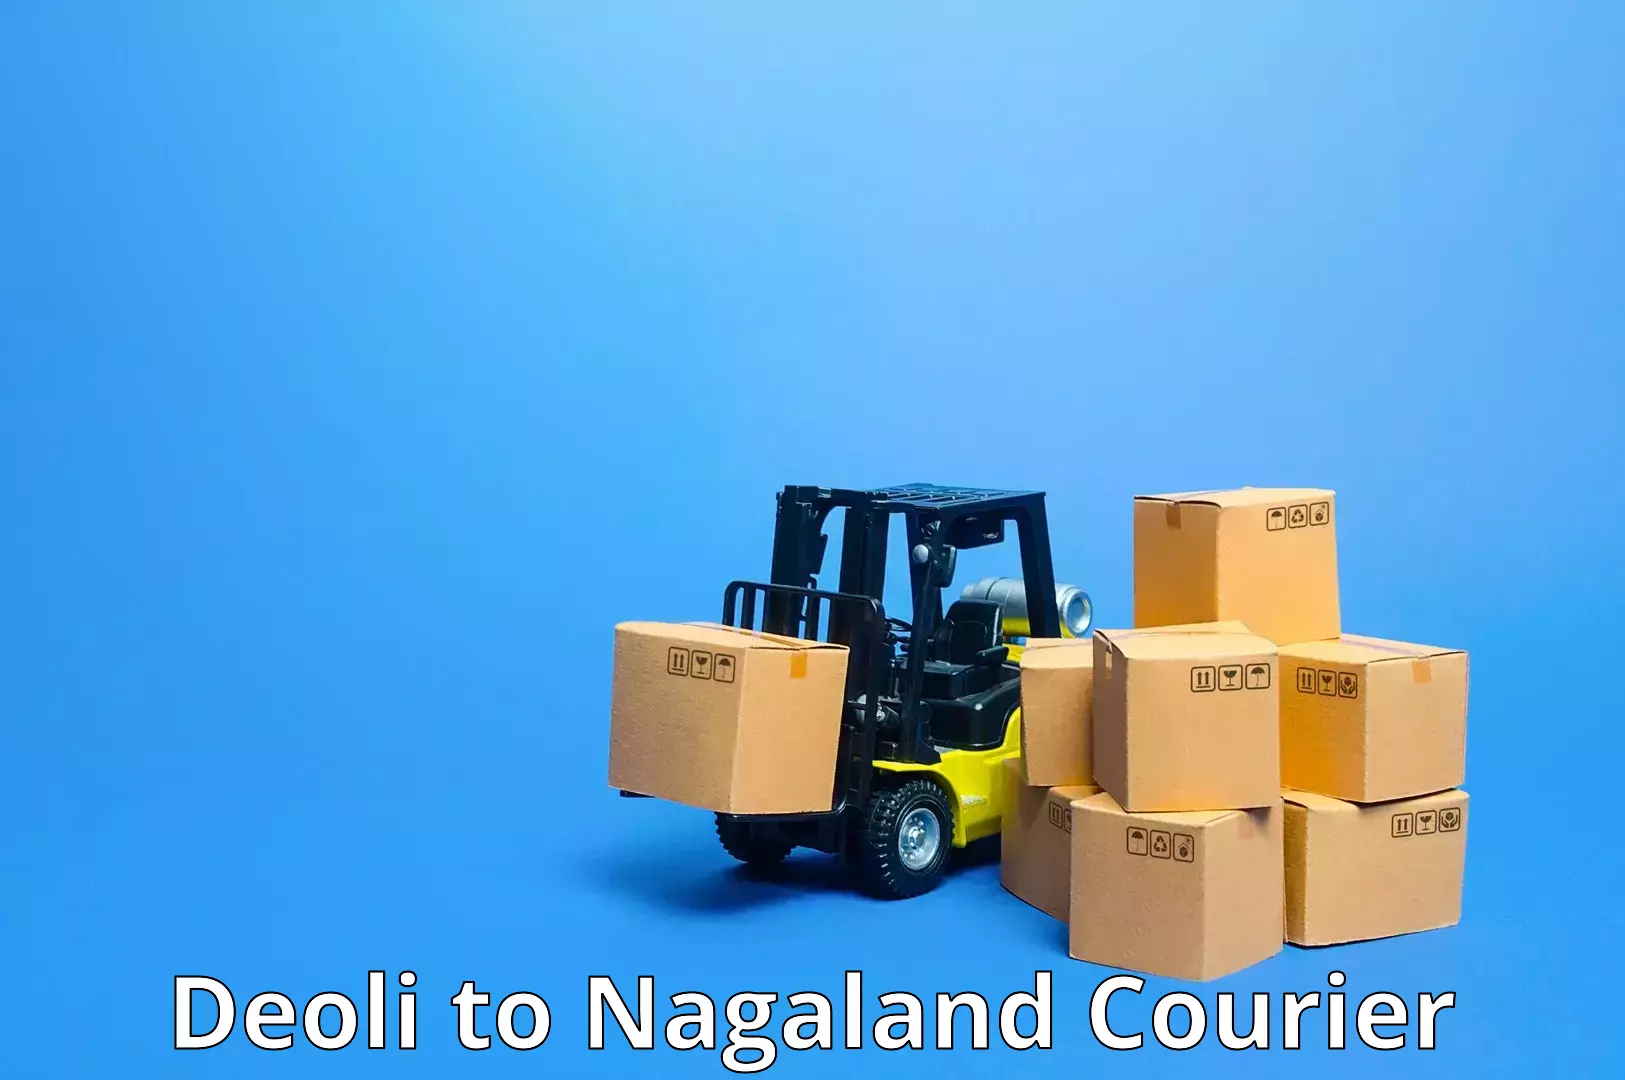 State-of-the-art courier technology Deoli to Nagaland